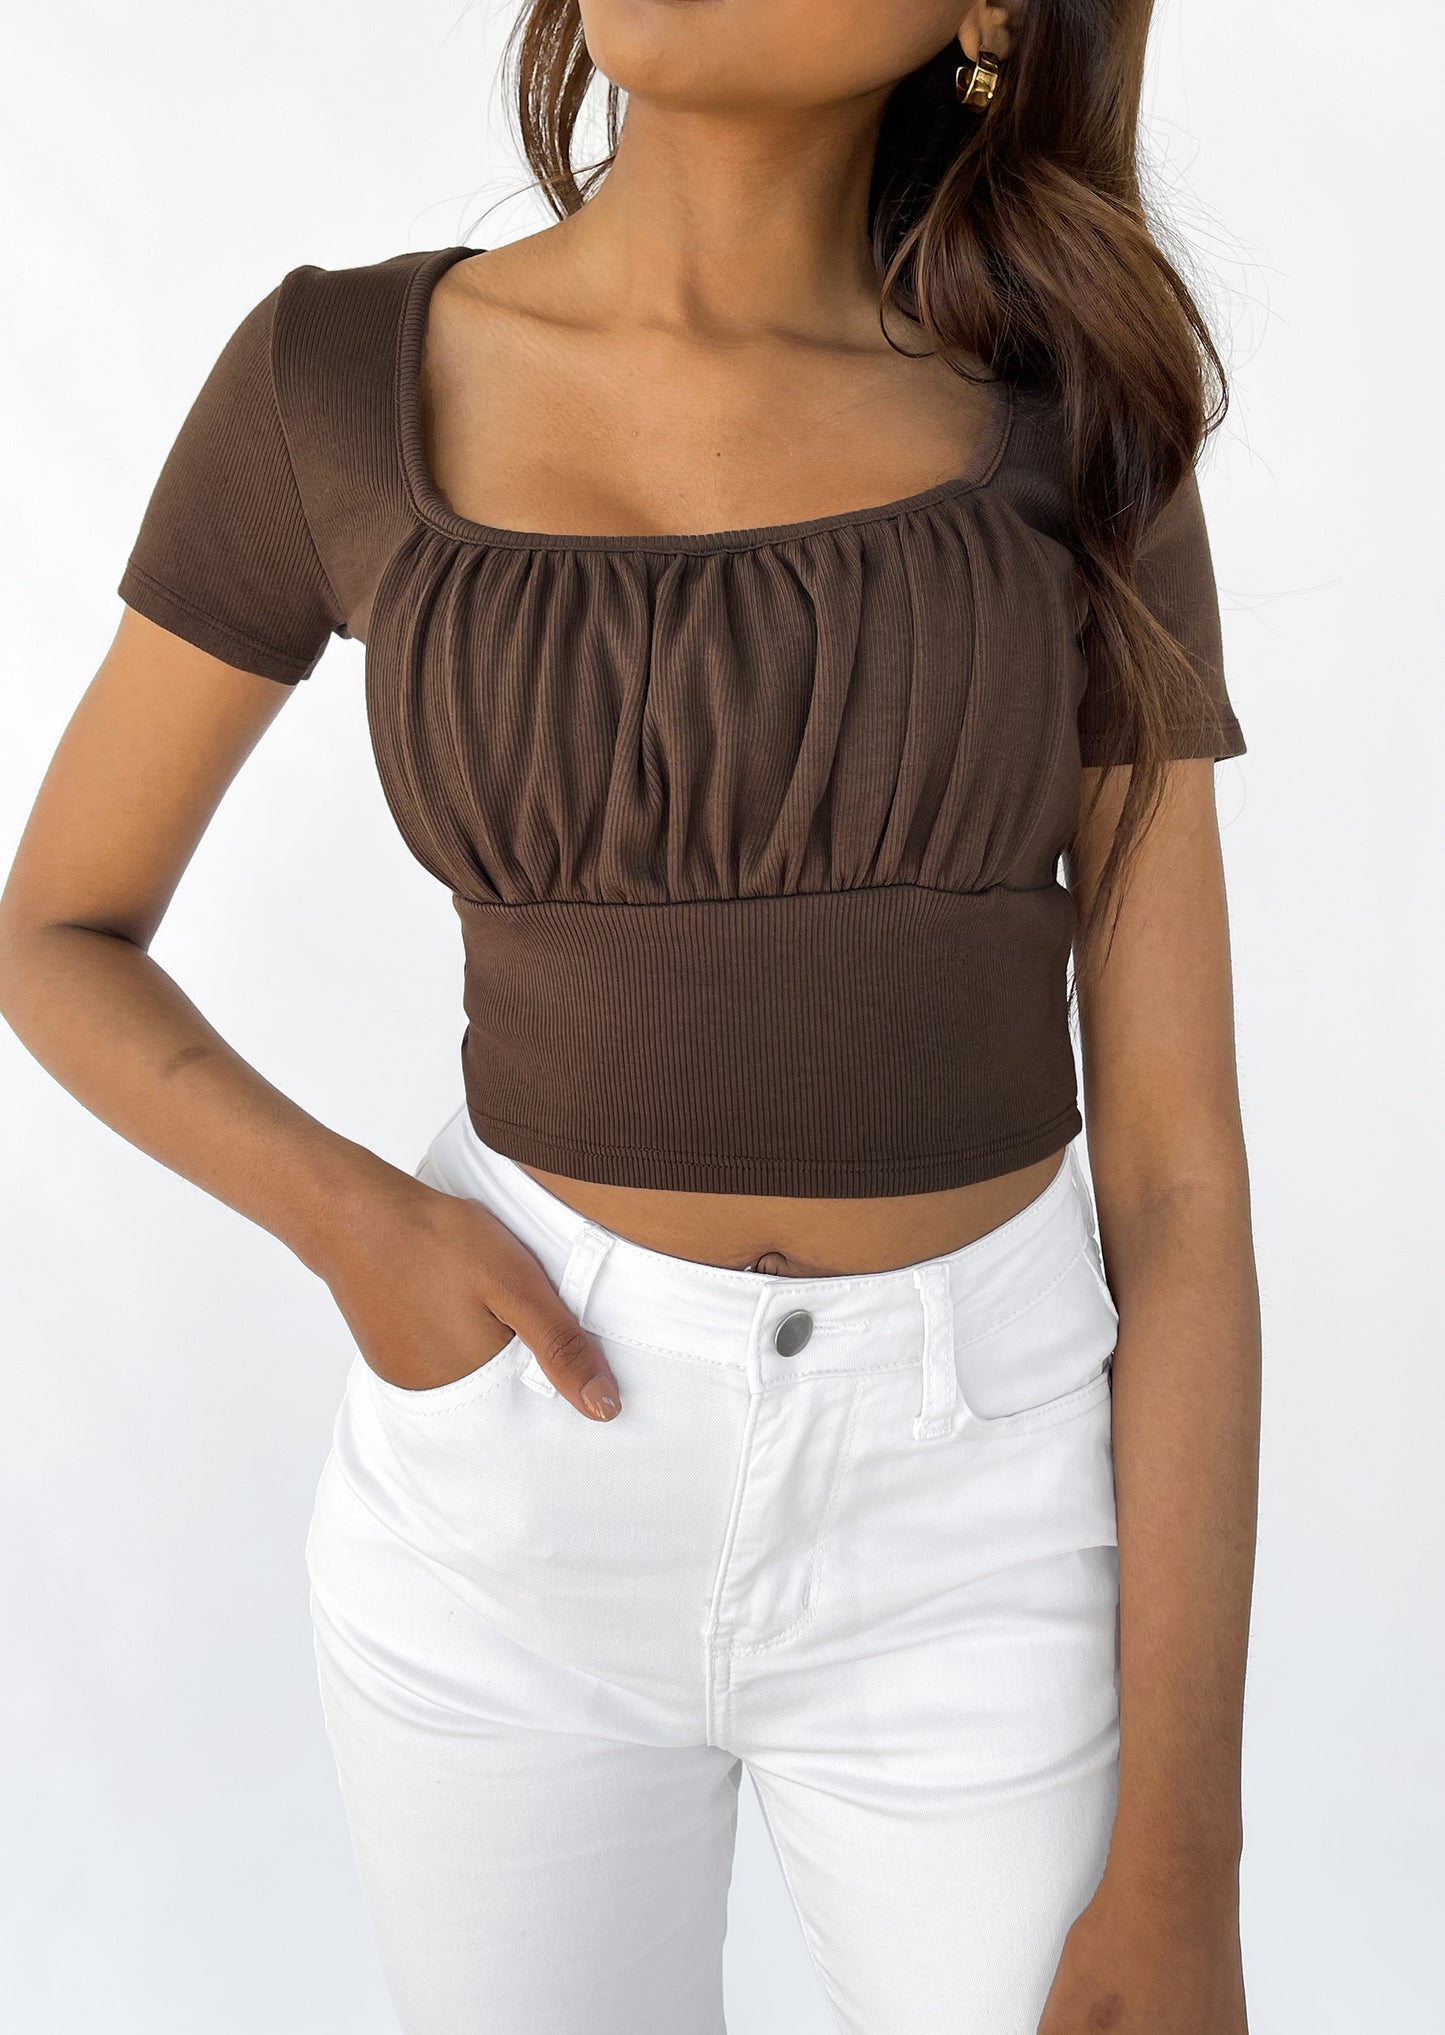 Ruched t-shirt in brown